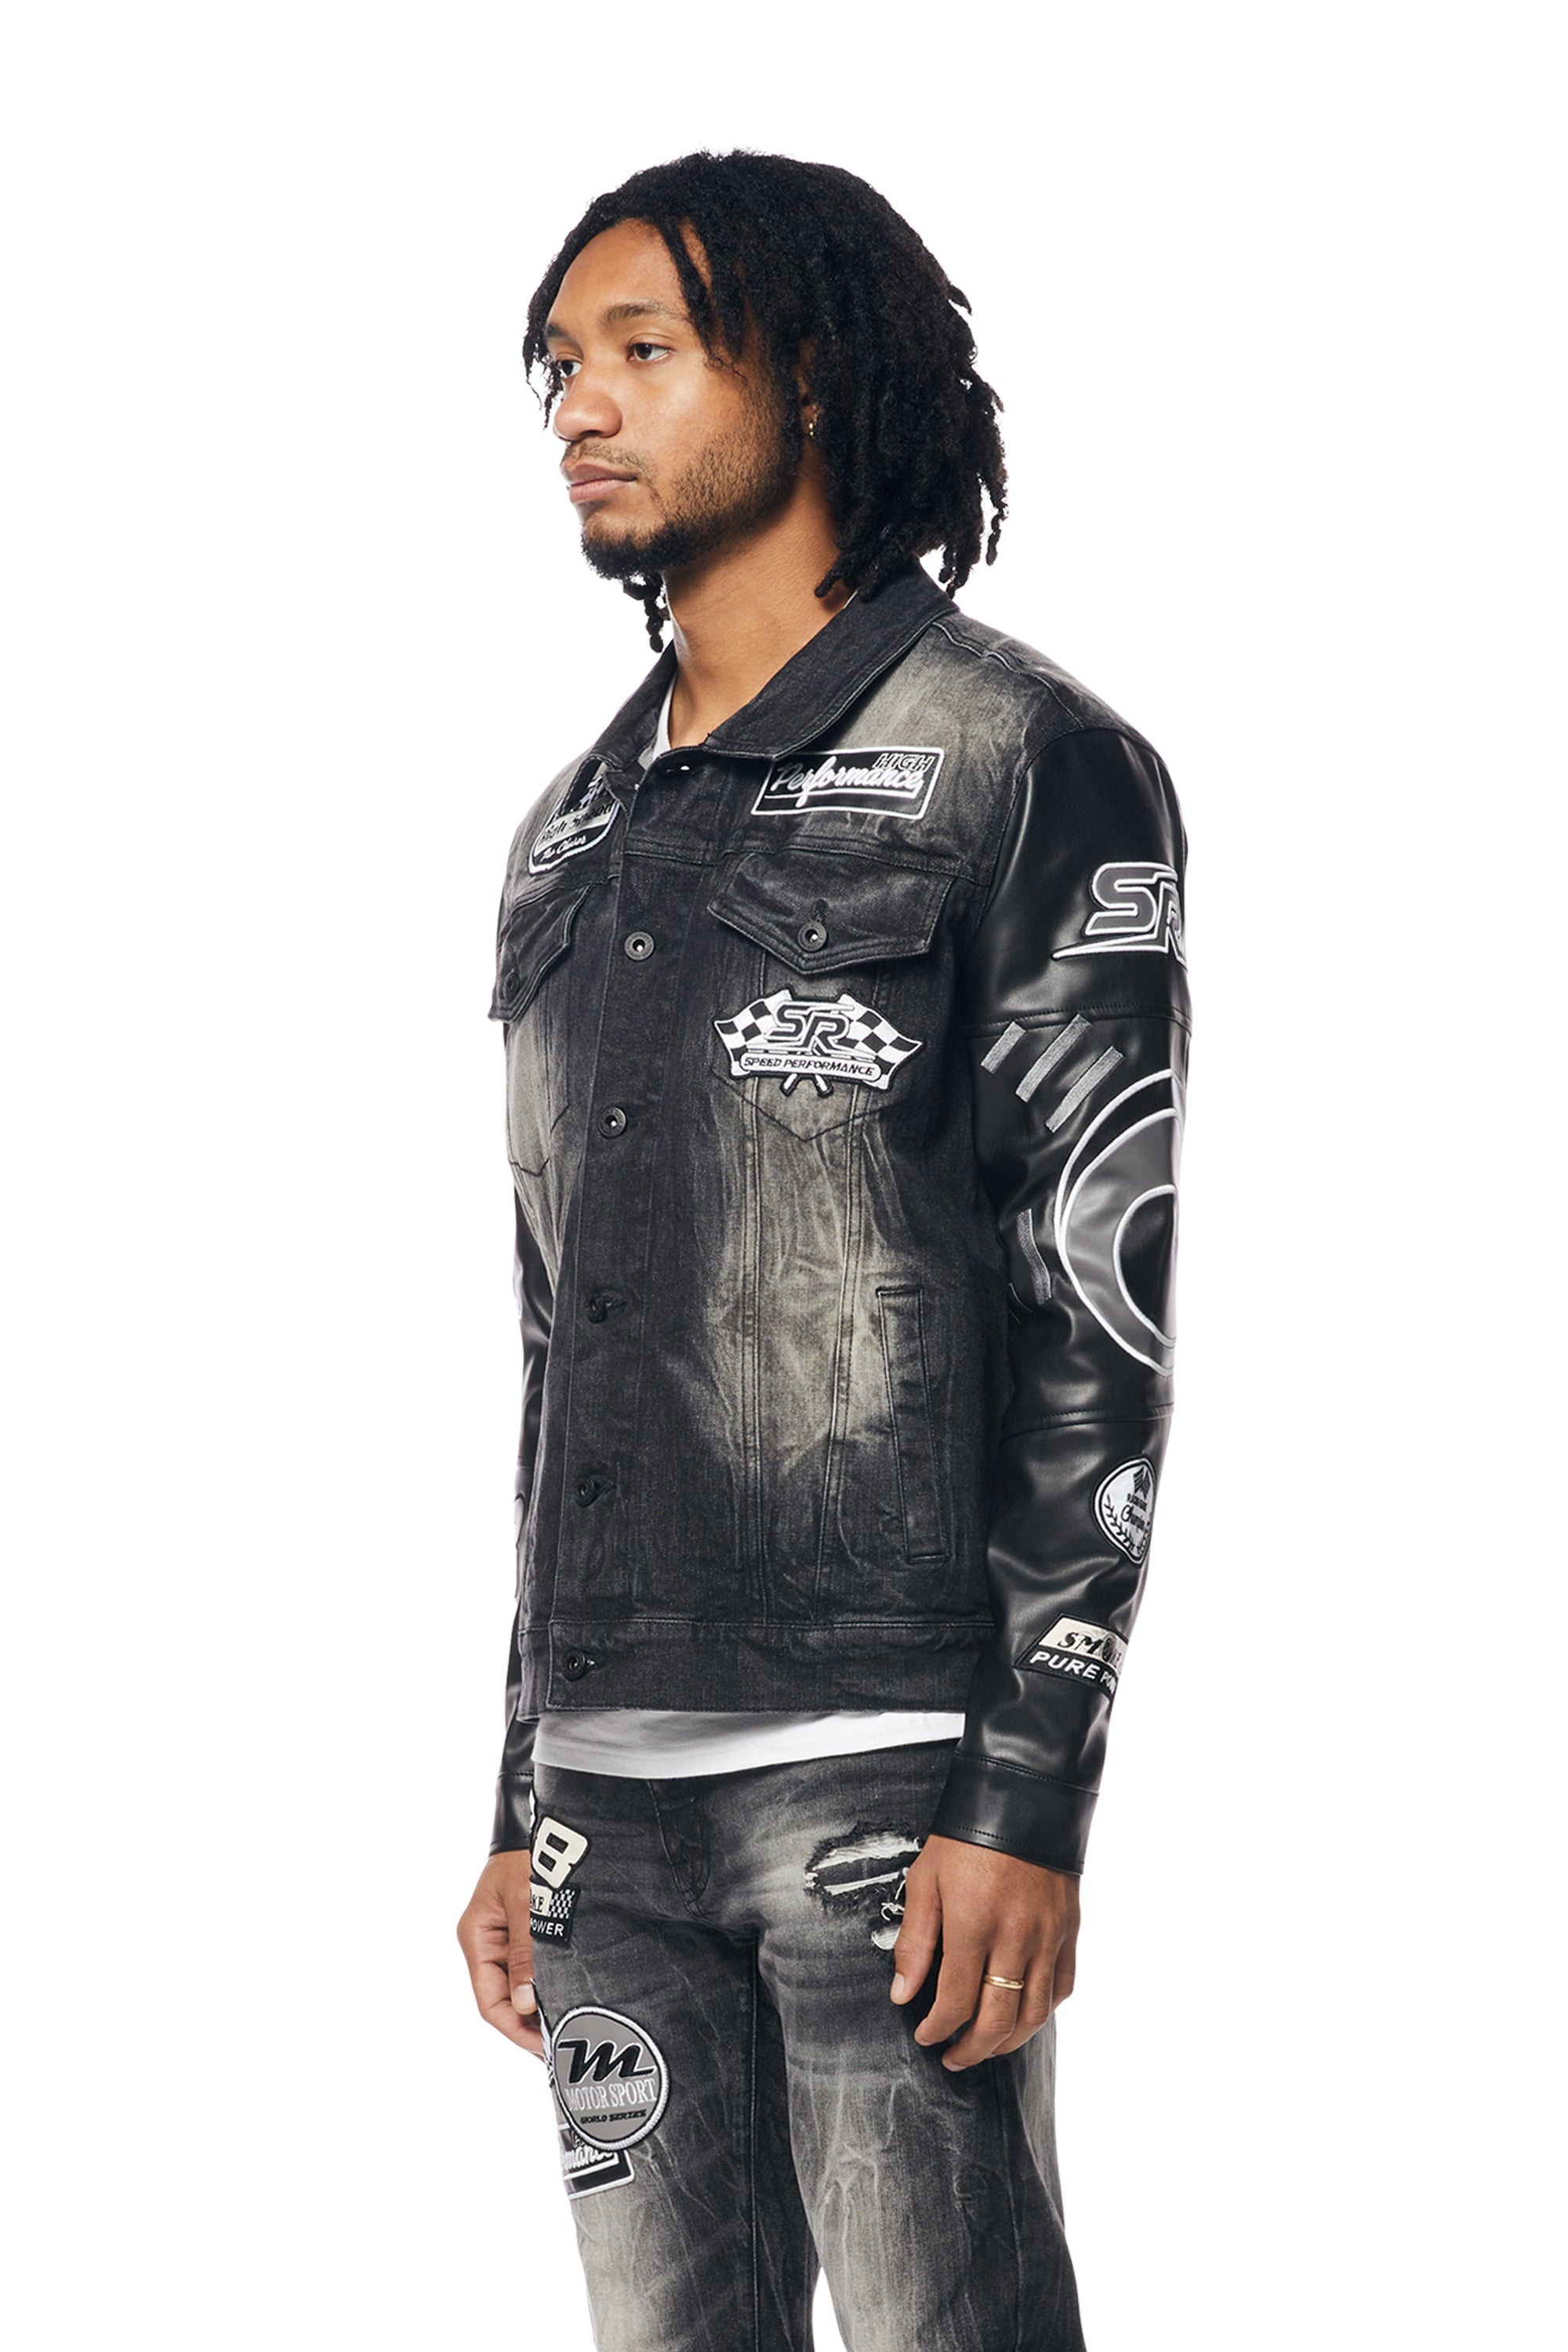 Embroidered Patched Racing Jean Jacket - Moon Black